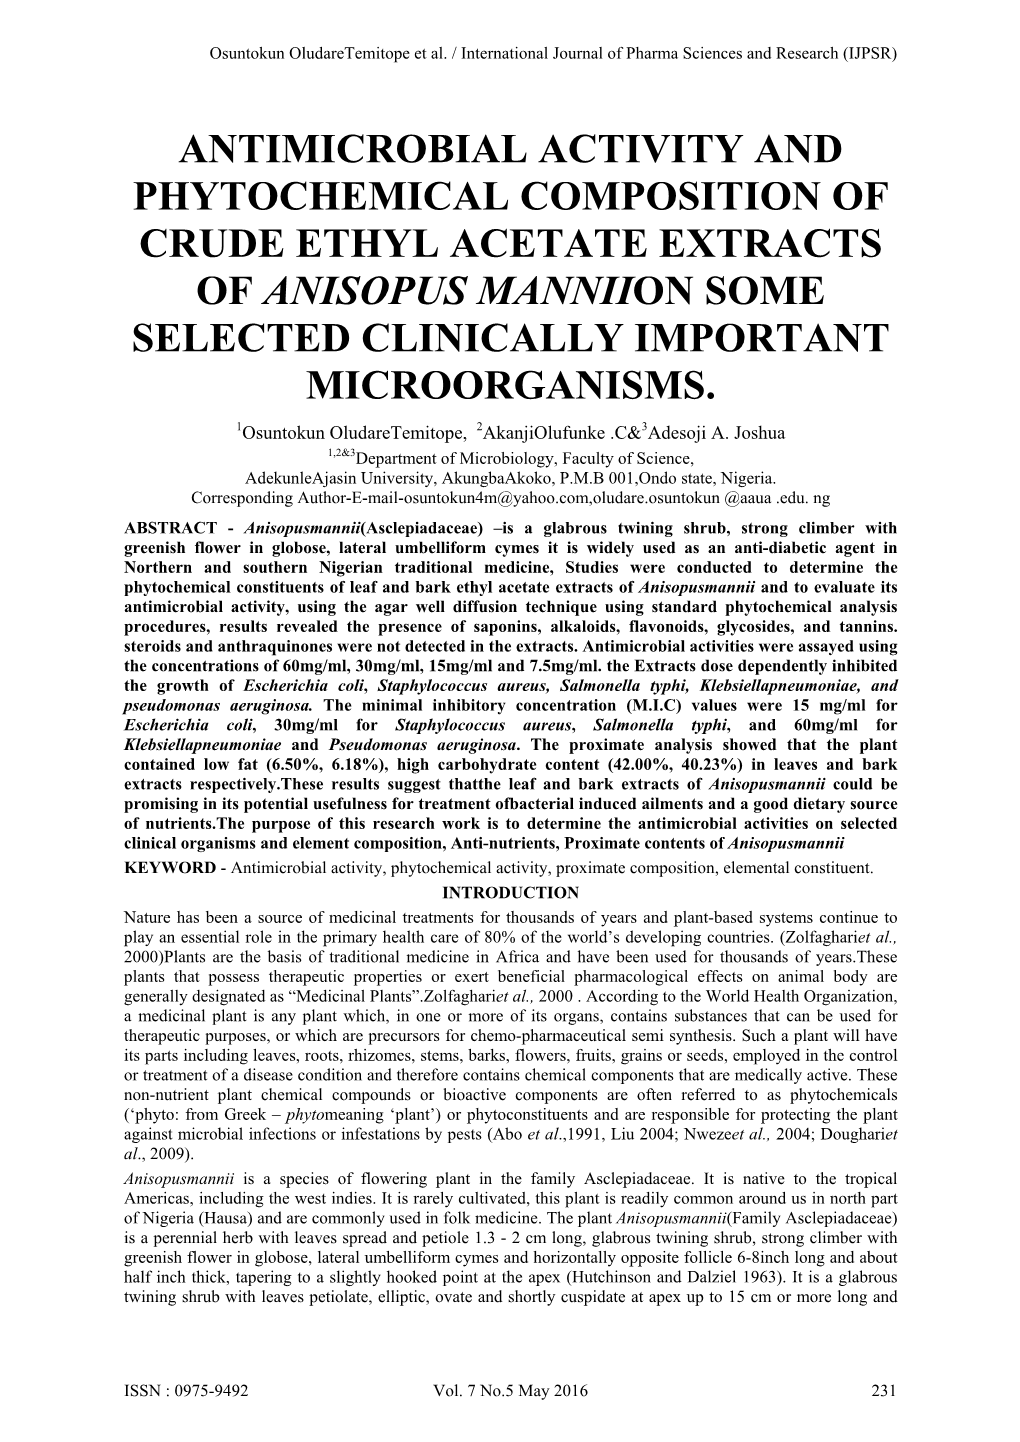 Antimicrobial Activity and Phytochemical Composition of Crude Ethyl Acetate Extracts of Anisopus Manniion Some Selected Clinically Important Microorganisms